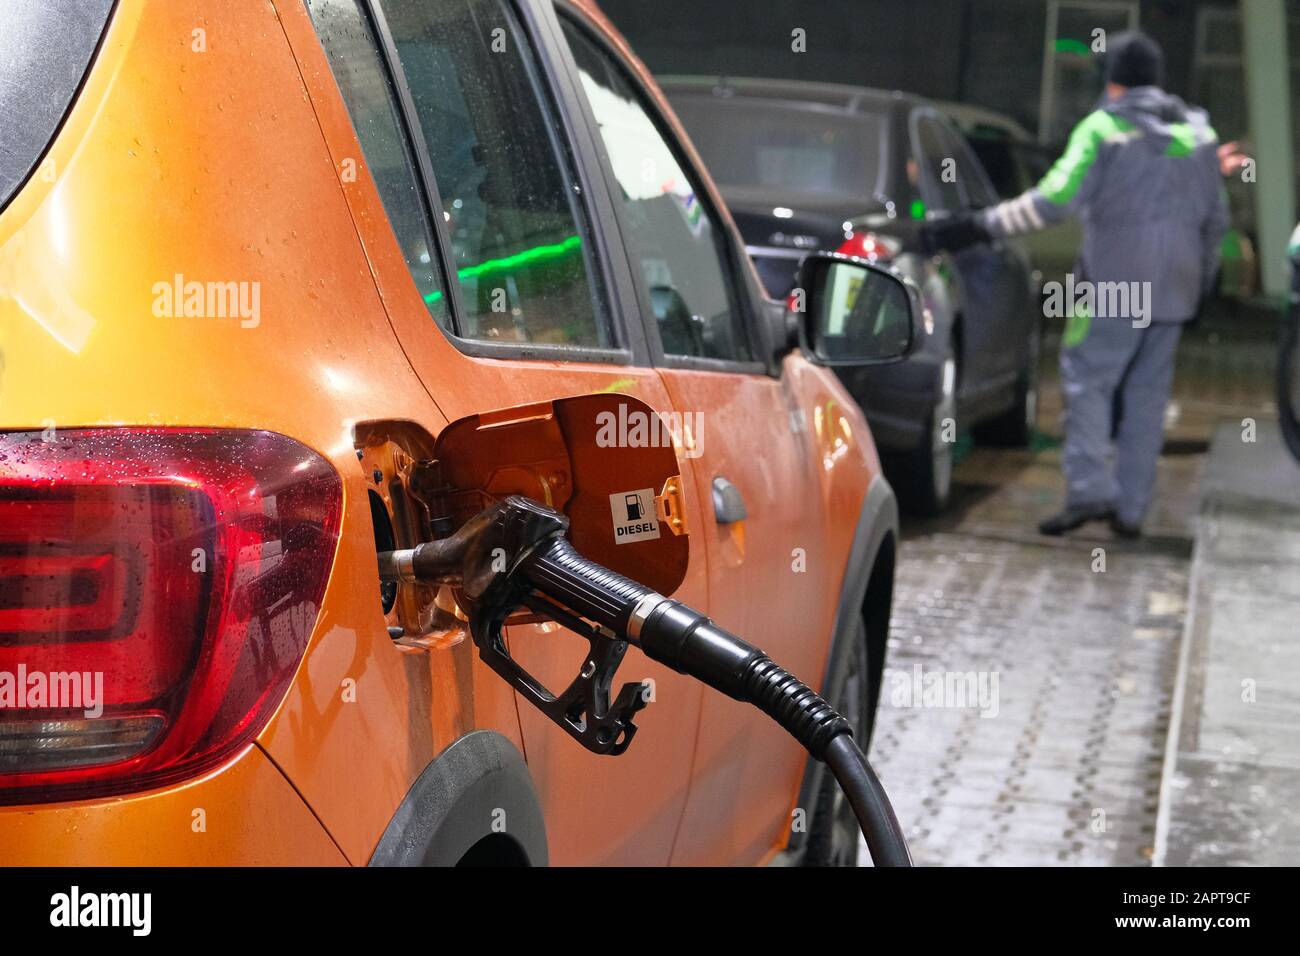 Car fill with diesel at petrol station. Pumping diesel fuel in orange car at gas station in evening. Stock Photo